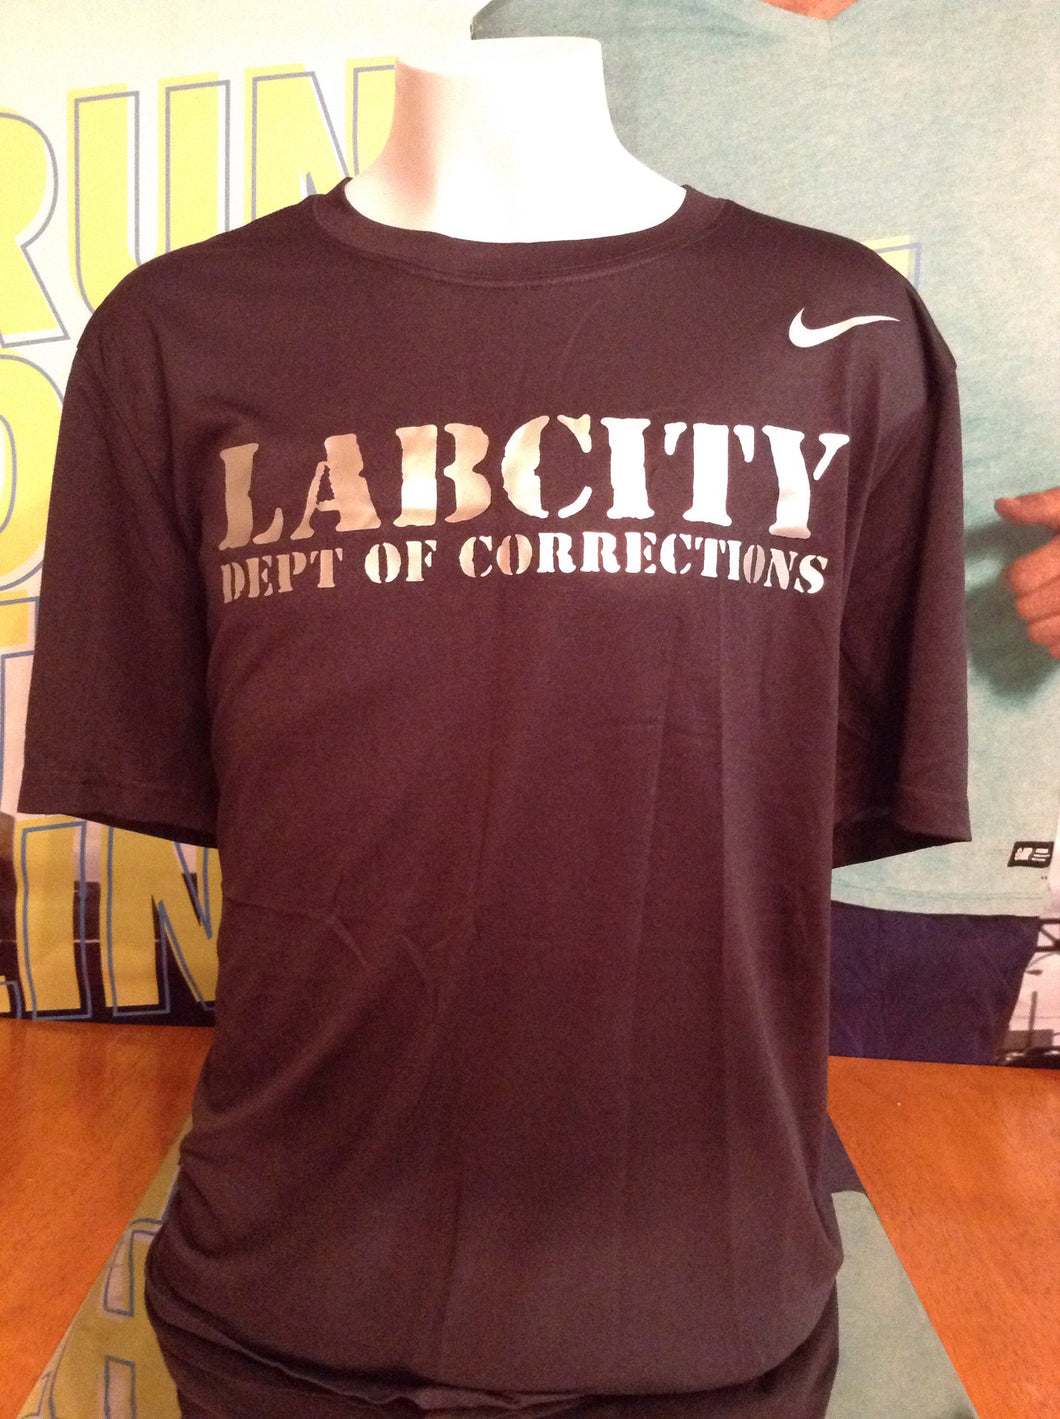 LABCITY DEPT OF CORRECTIONS TEE